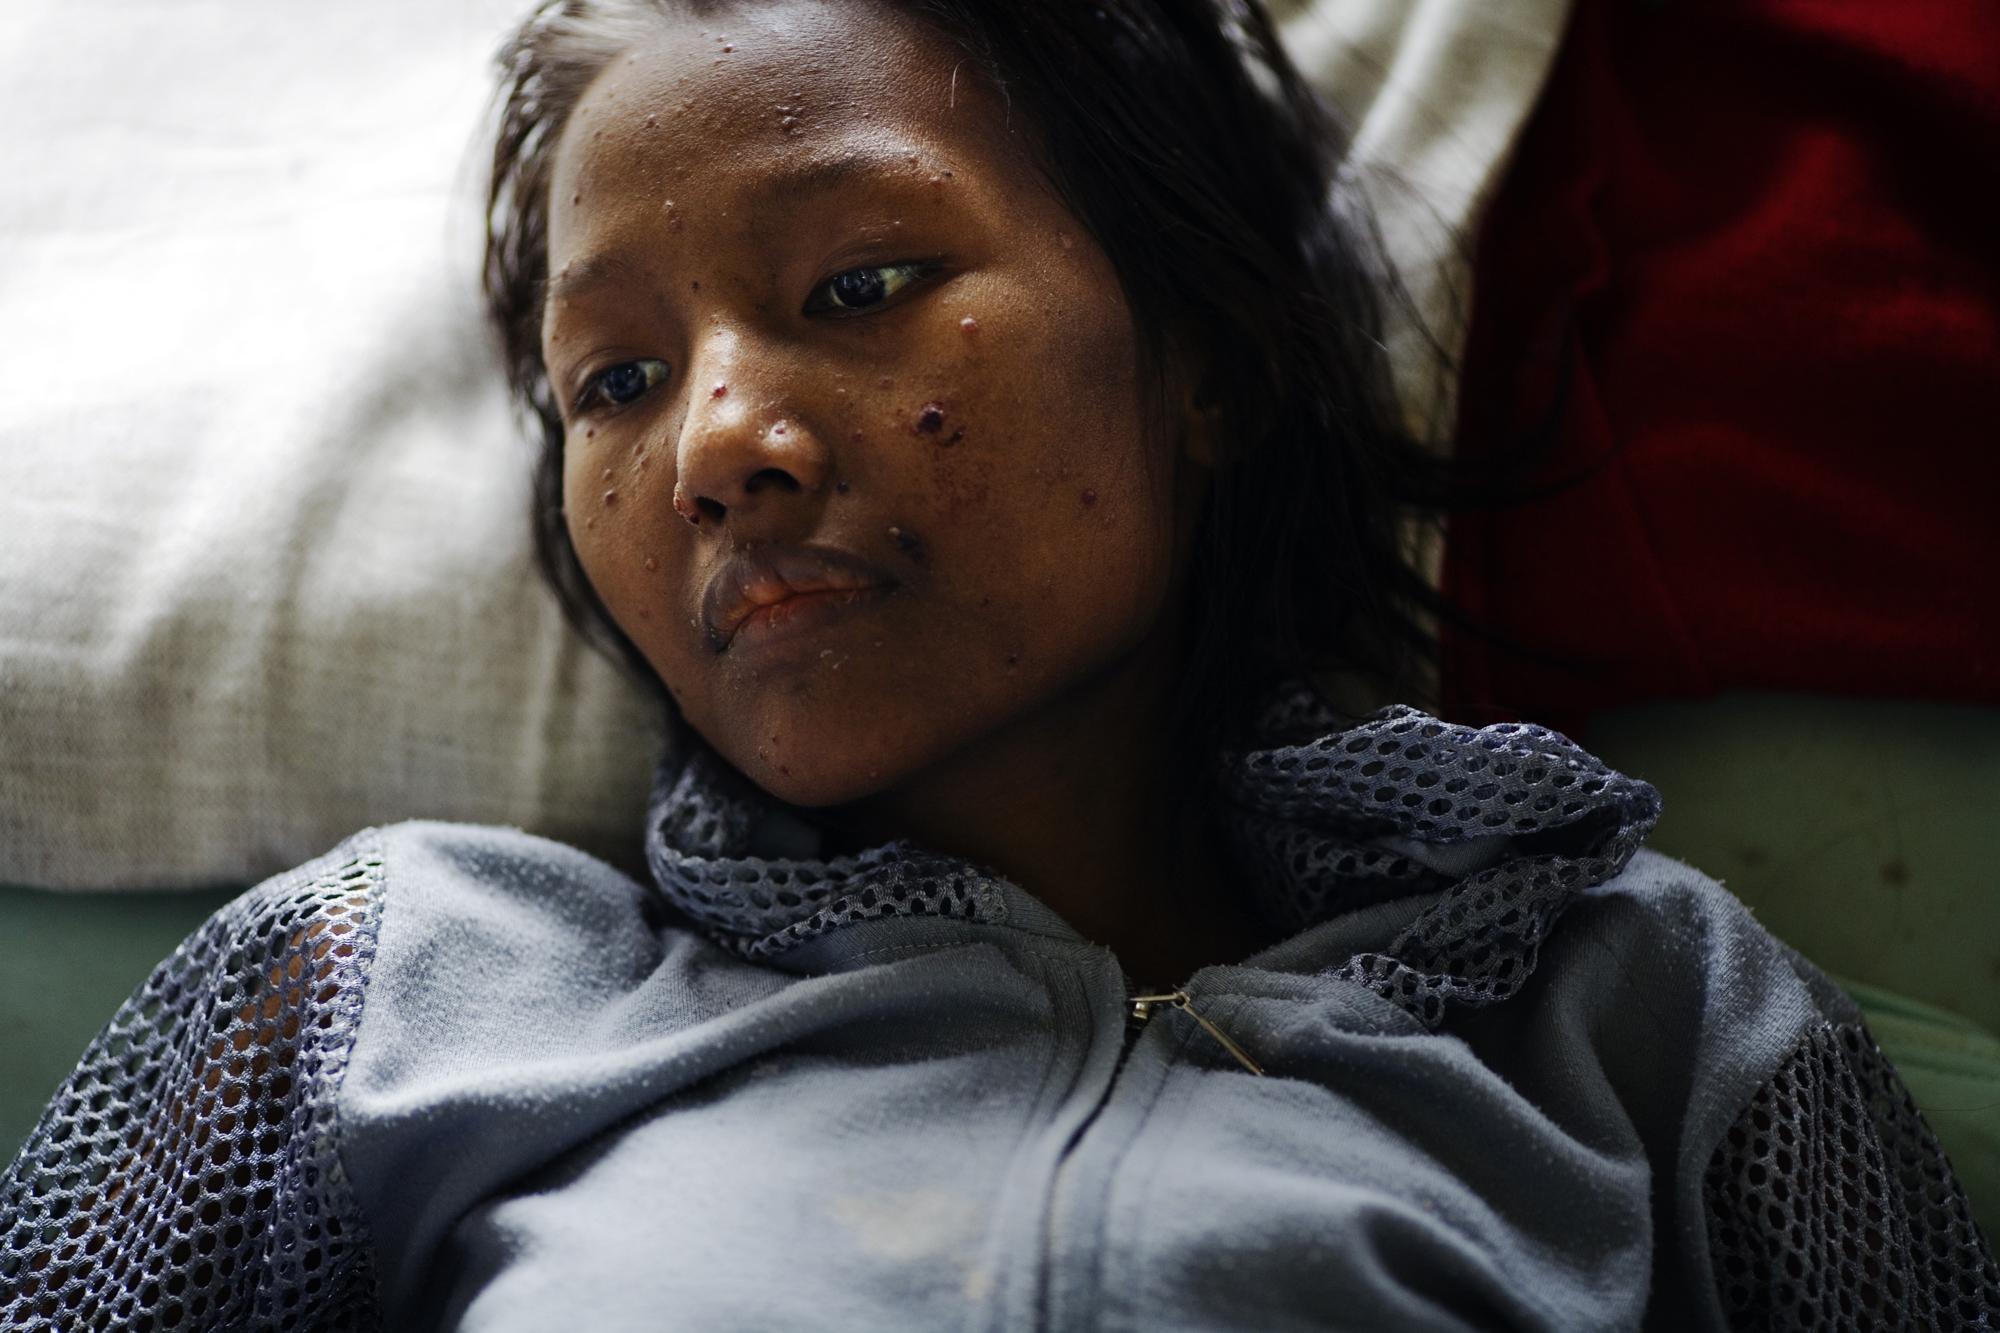 Injecting death - INDIA Aizawl, Mizoram A young AIDS patient at the Grace...